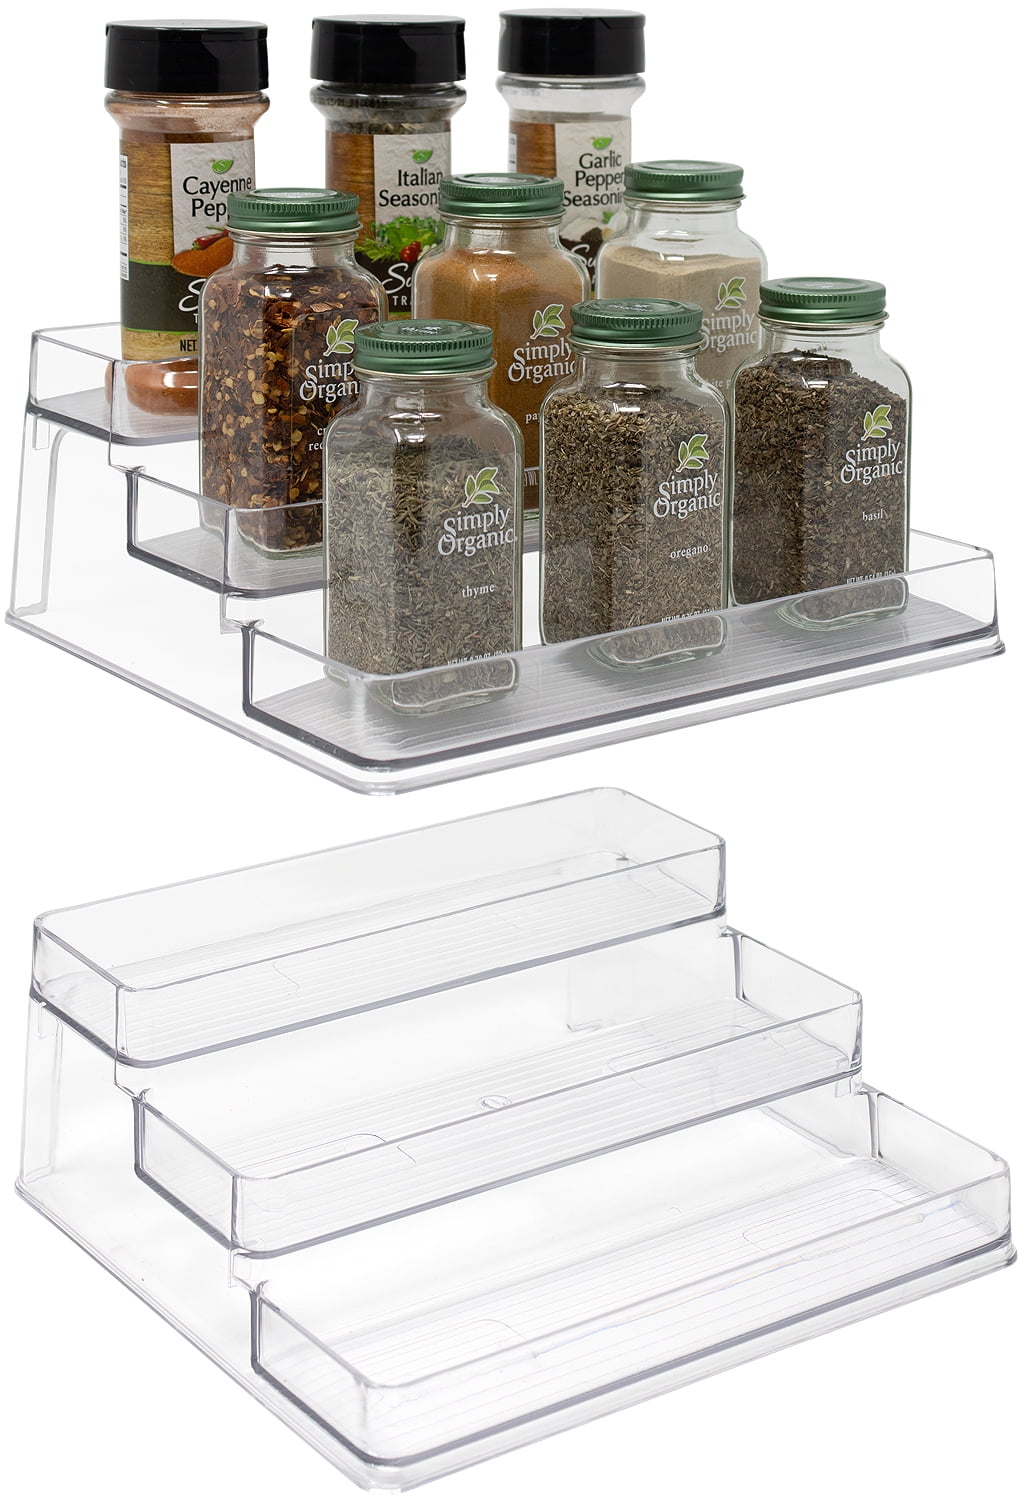 Clear Home Intuition 3-Tier Spice Rack Step Shelf Cabinet Organizer 1